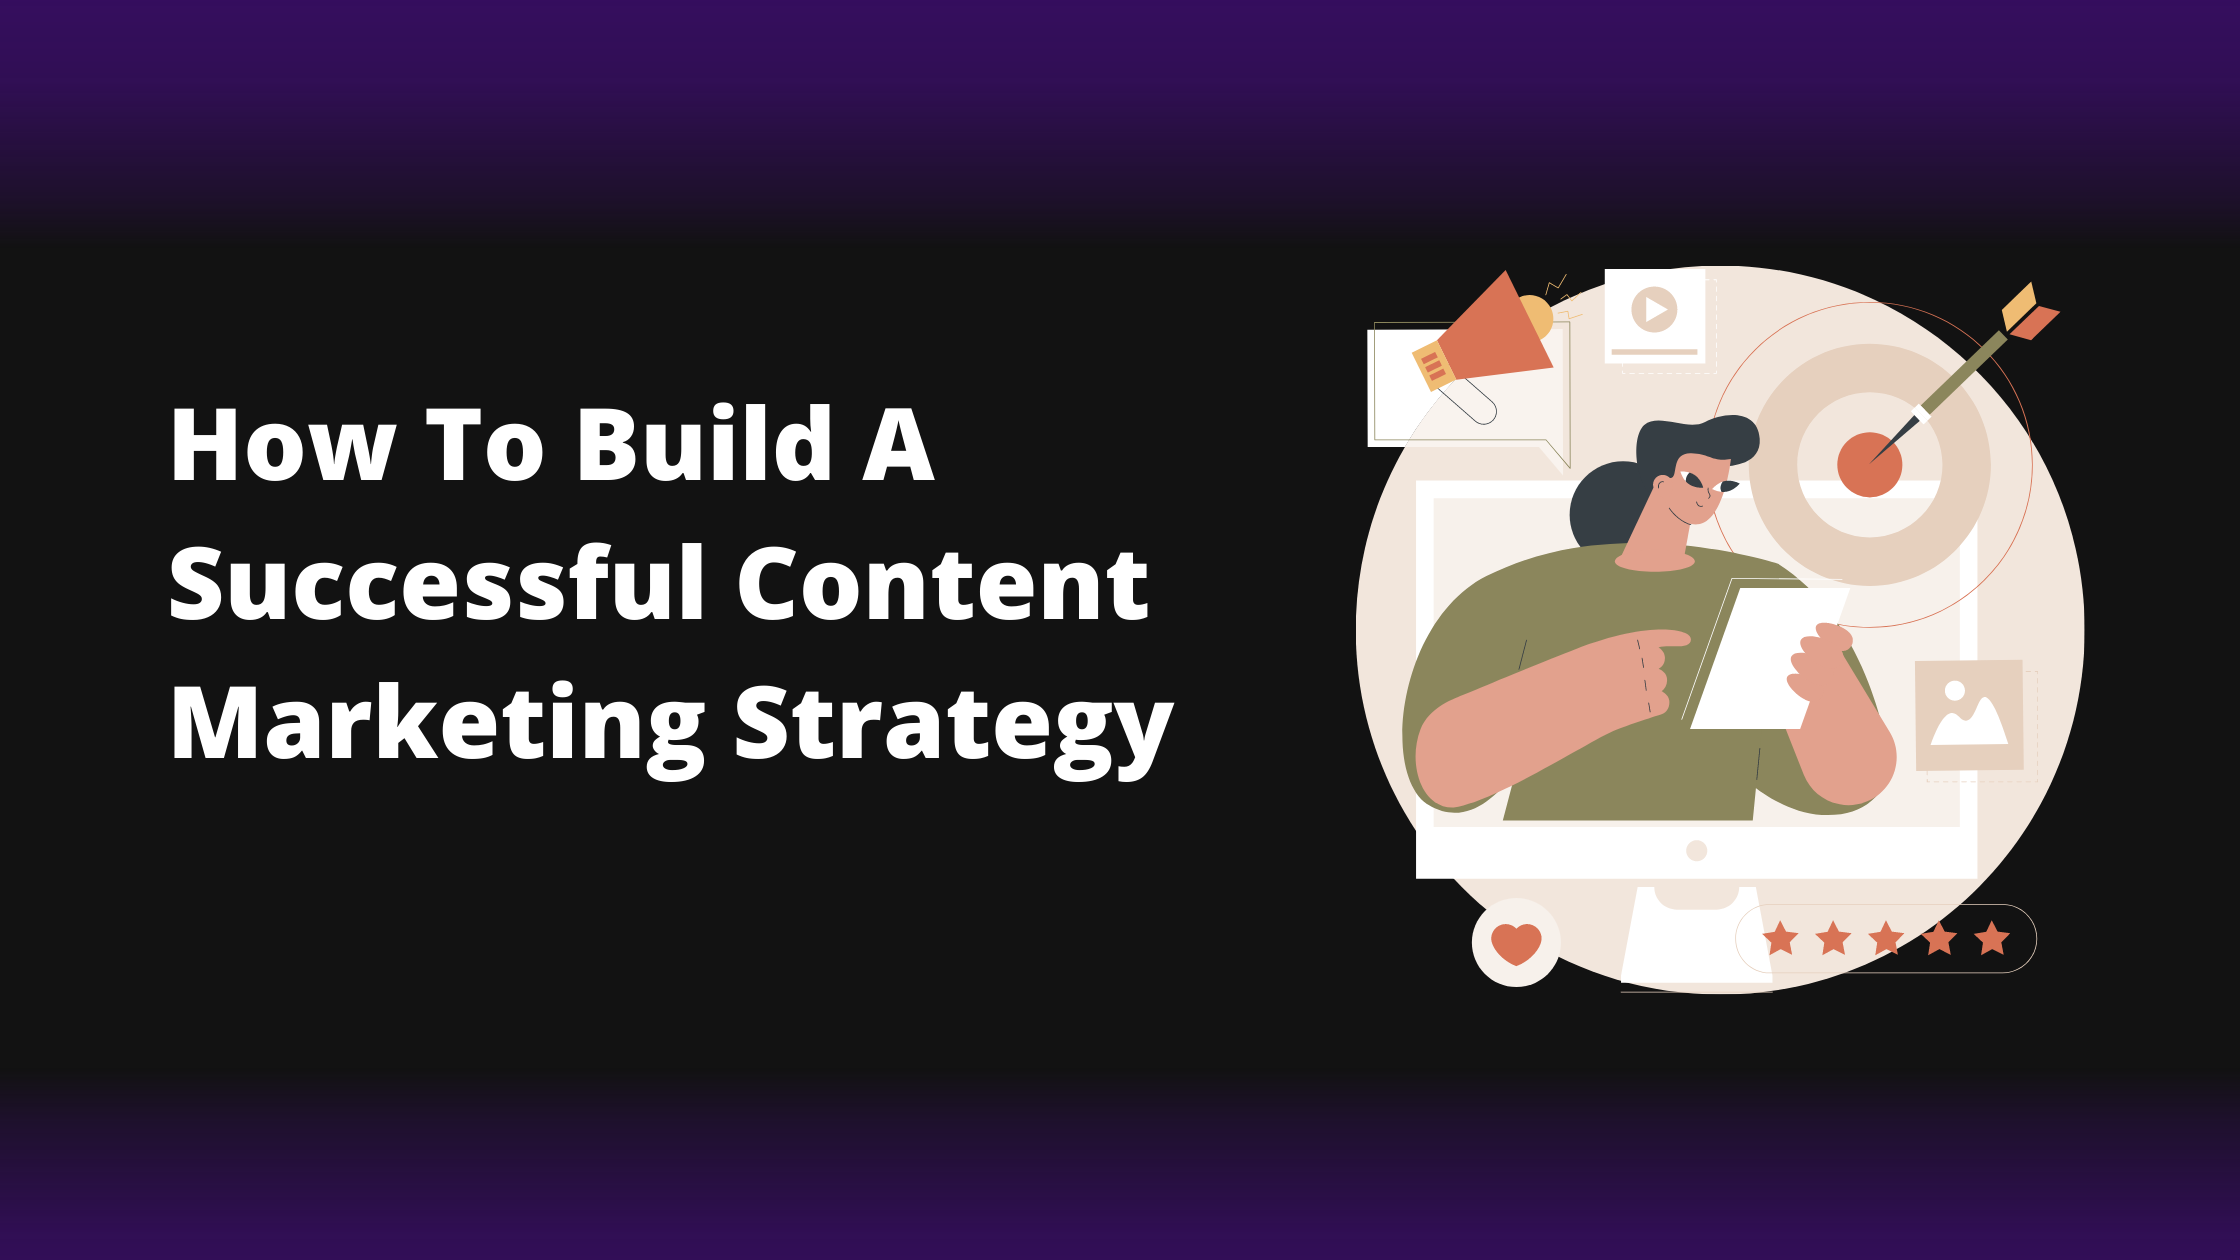 How to Build a Successful Content Marketing Strategy